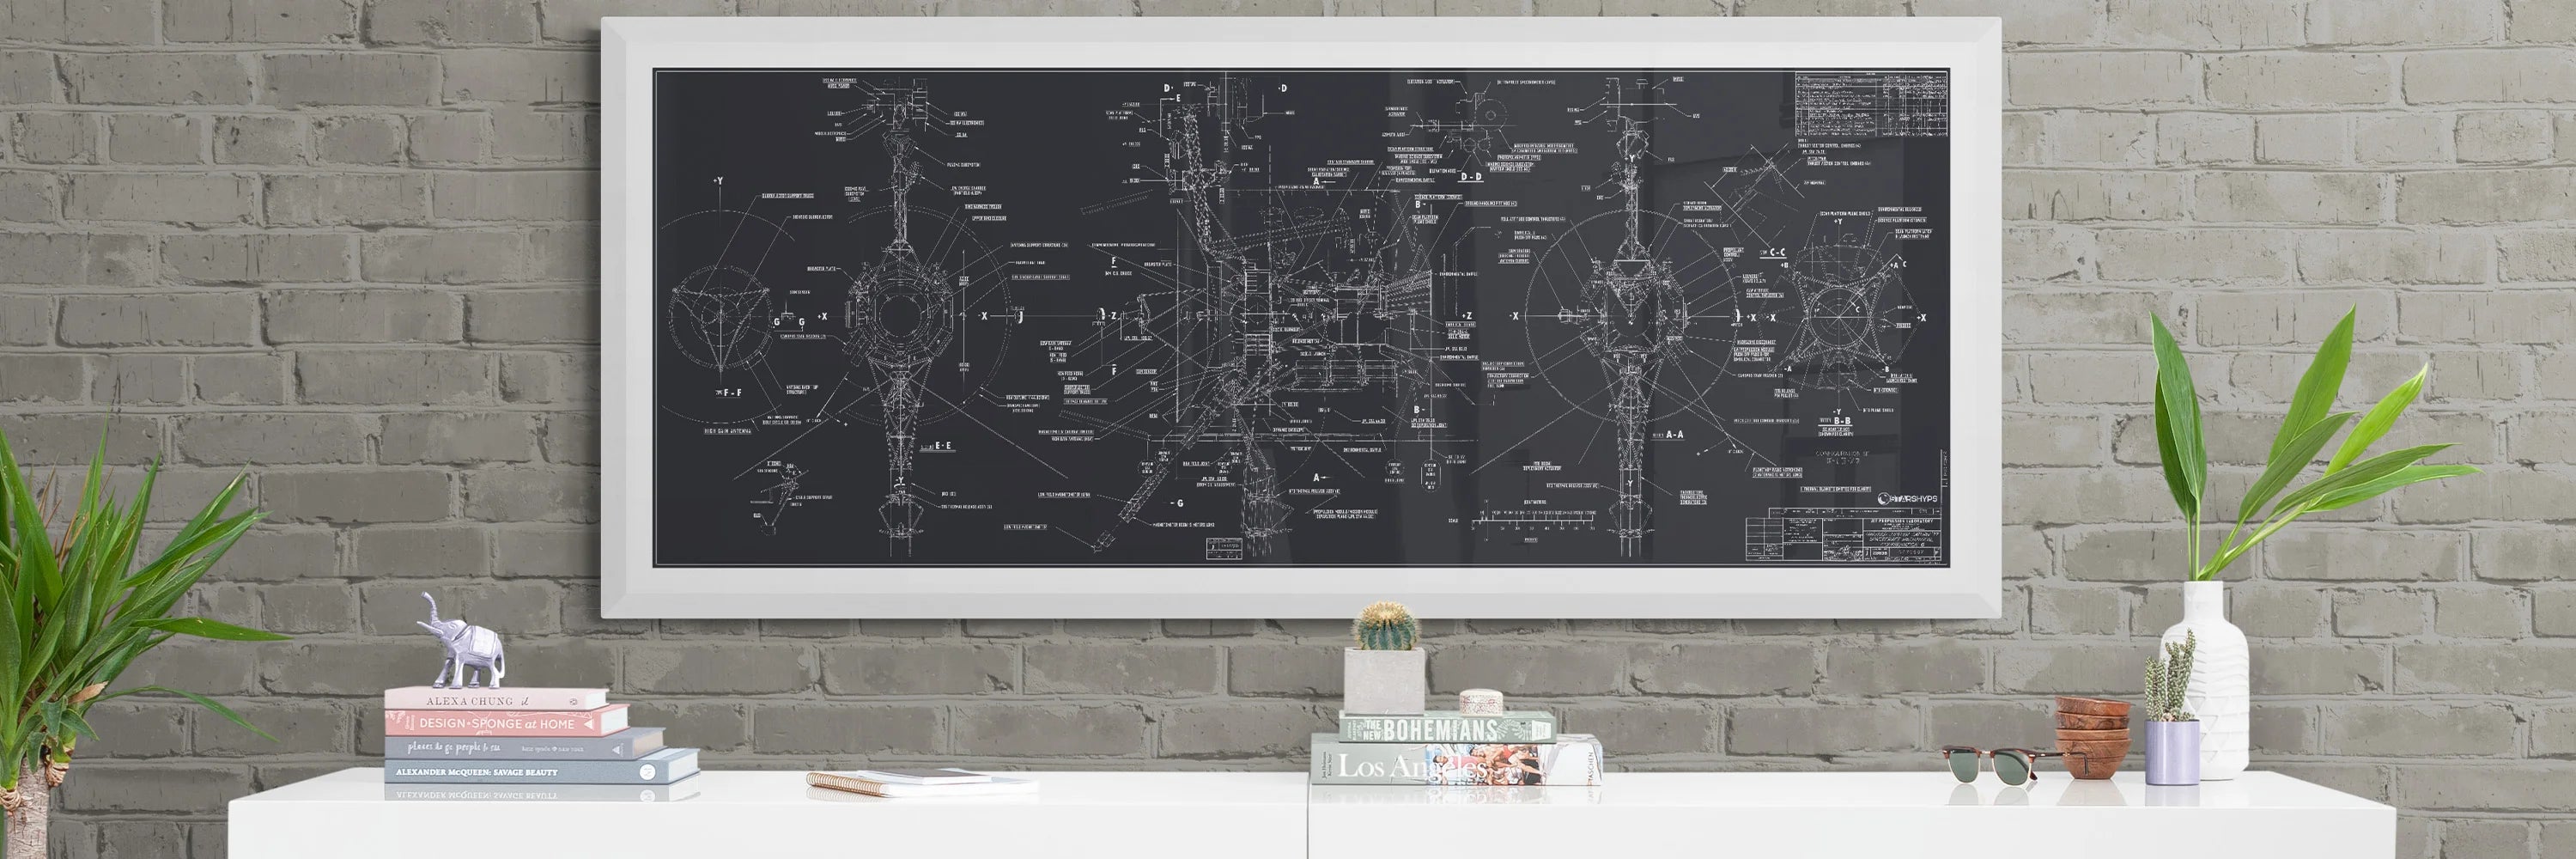 Voyager Space Probes Blueprint | Rocket Blueprint Posters | NASA | JPL | The framed Voyager probes blueprint poster, filled with intricate technical drawings and annotations, is mounted on a gray brick wall. Below, a white cabinet is styled with a mix of books, a potted plant, and decorative items.